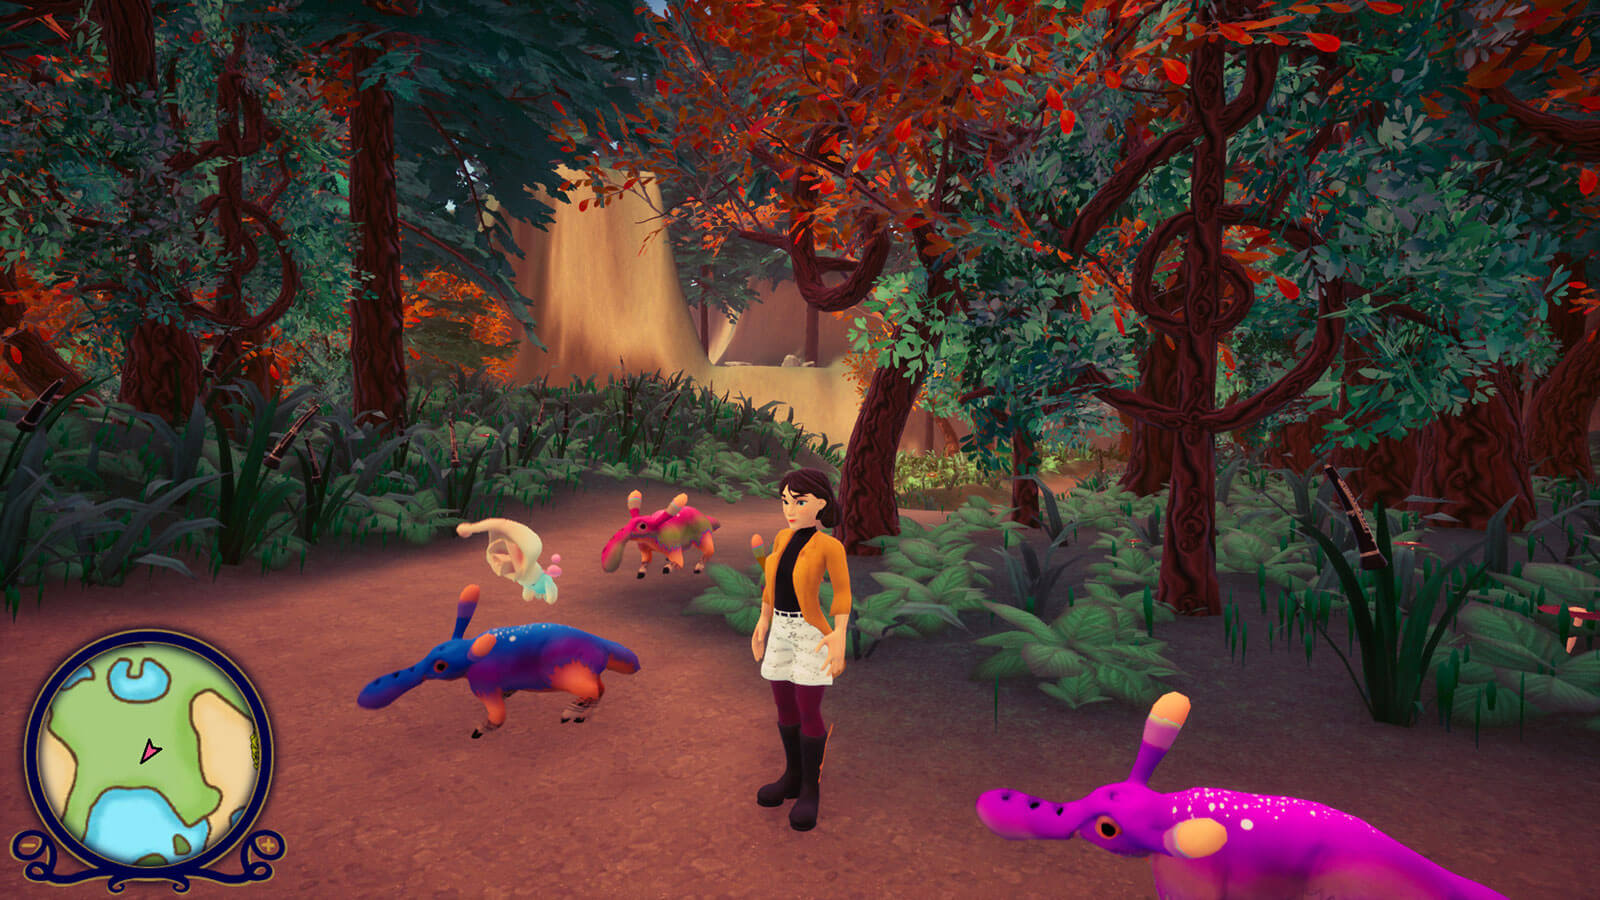 A woman stands in a forest grove surrounded by small colorful creatures.